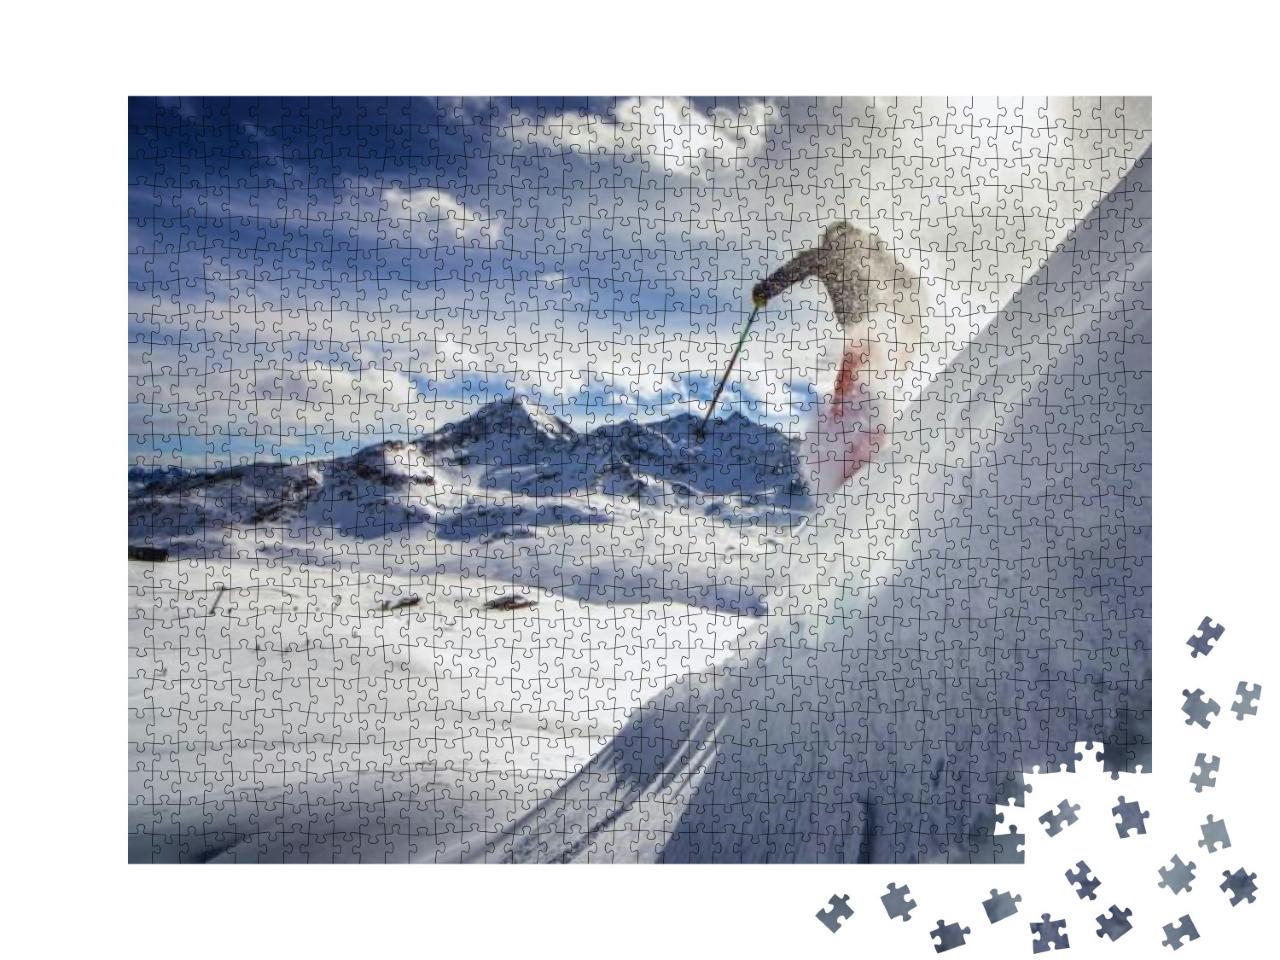 Free Ride Skier, Skiing Down Steep Slope, Good Background... Jigsaw Puzzle with 1000 pieces